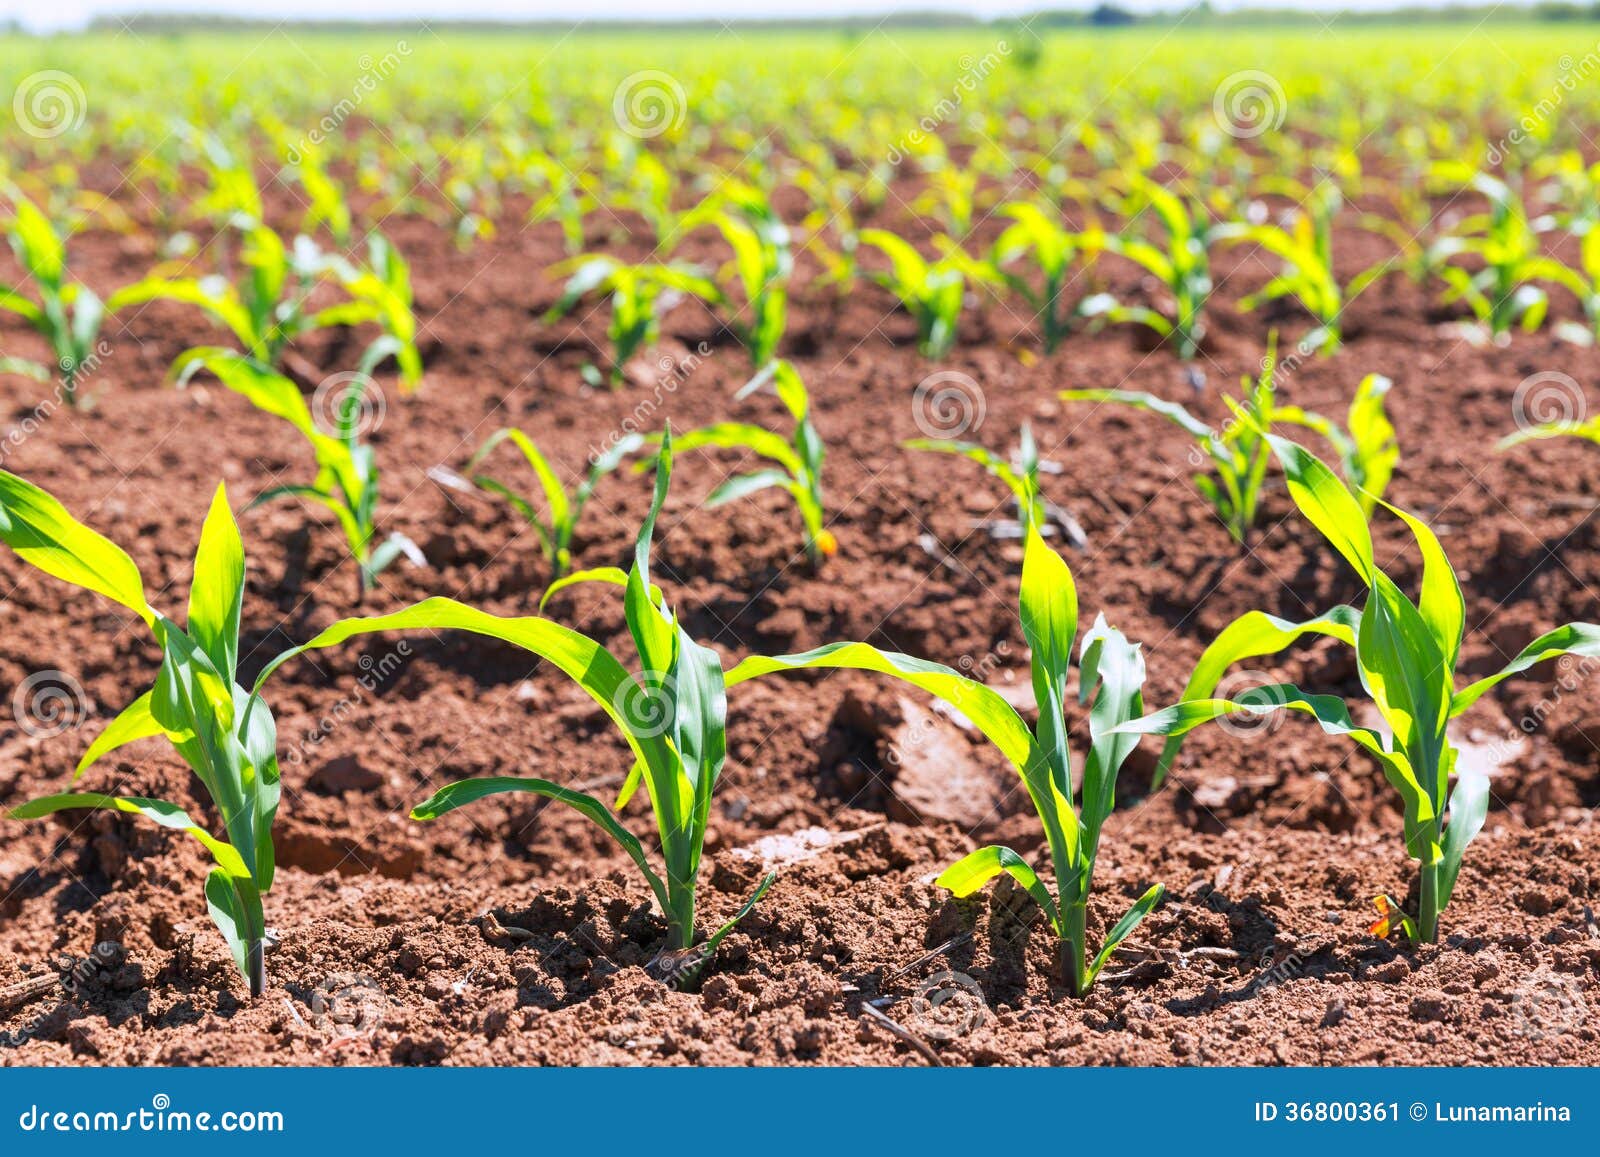 corn fields sprouts in rows in california agriculture